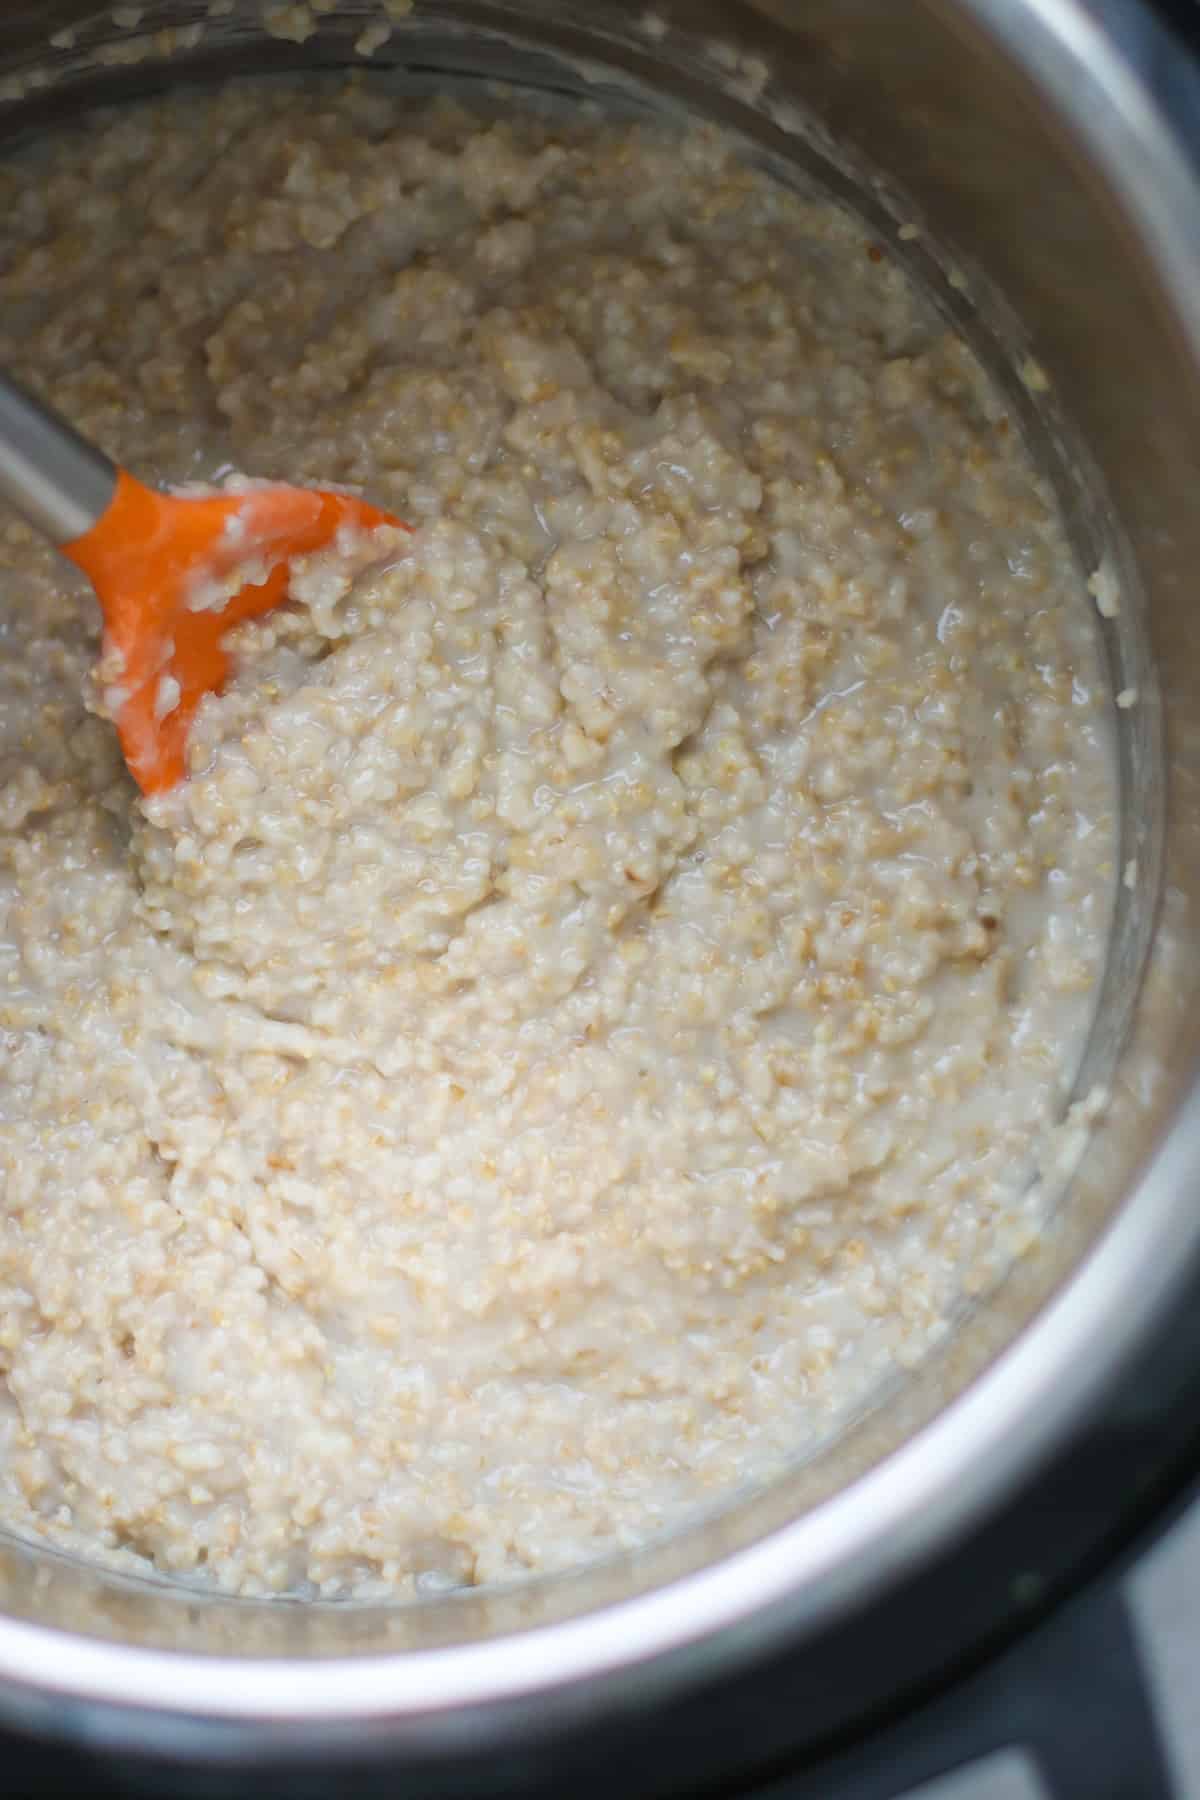 Cooked steel cut oats in the Instant Pot.